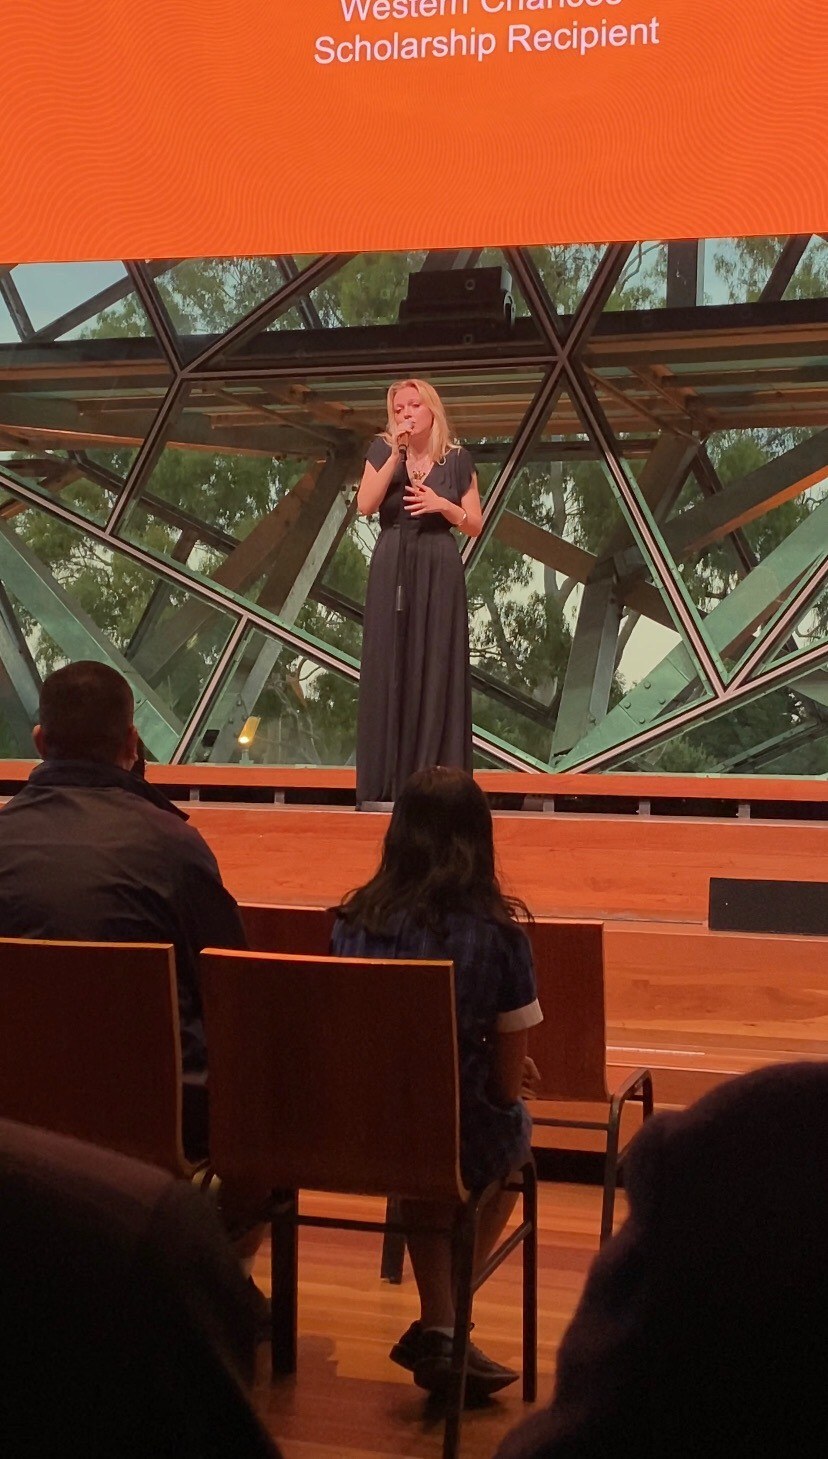 Violet Mccurley performing at The Edge - Federation Square for the Western Chances Award Ceremony 2023